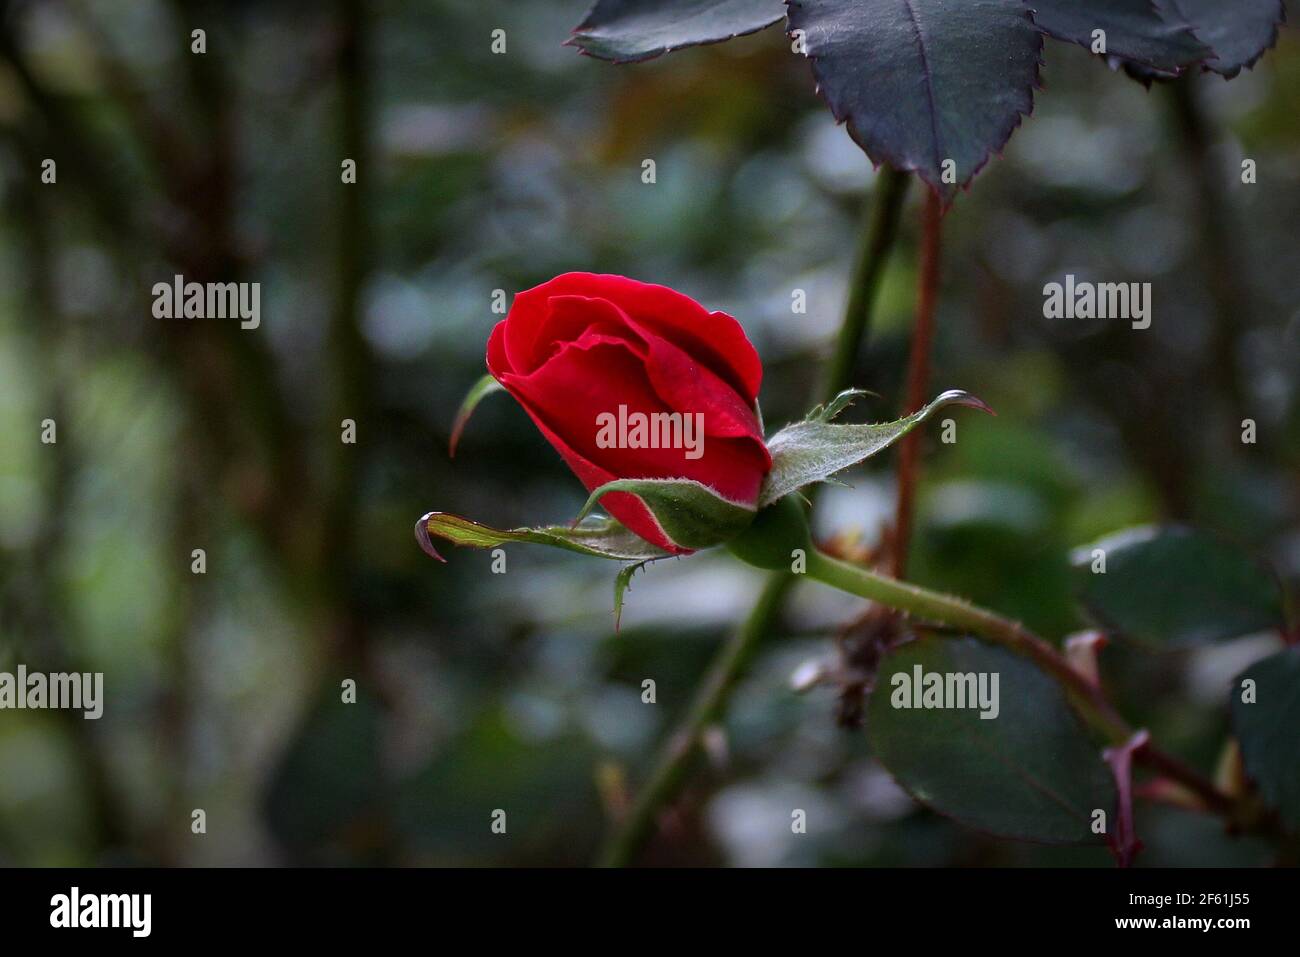 close-up of a tiny red rosebud among green leaves Stock Photo